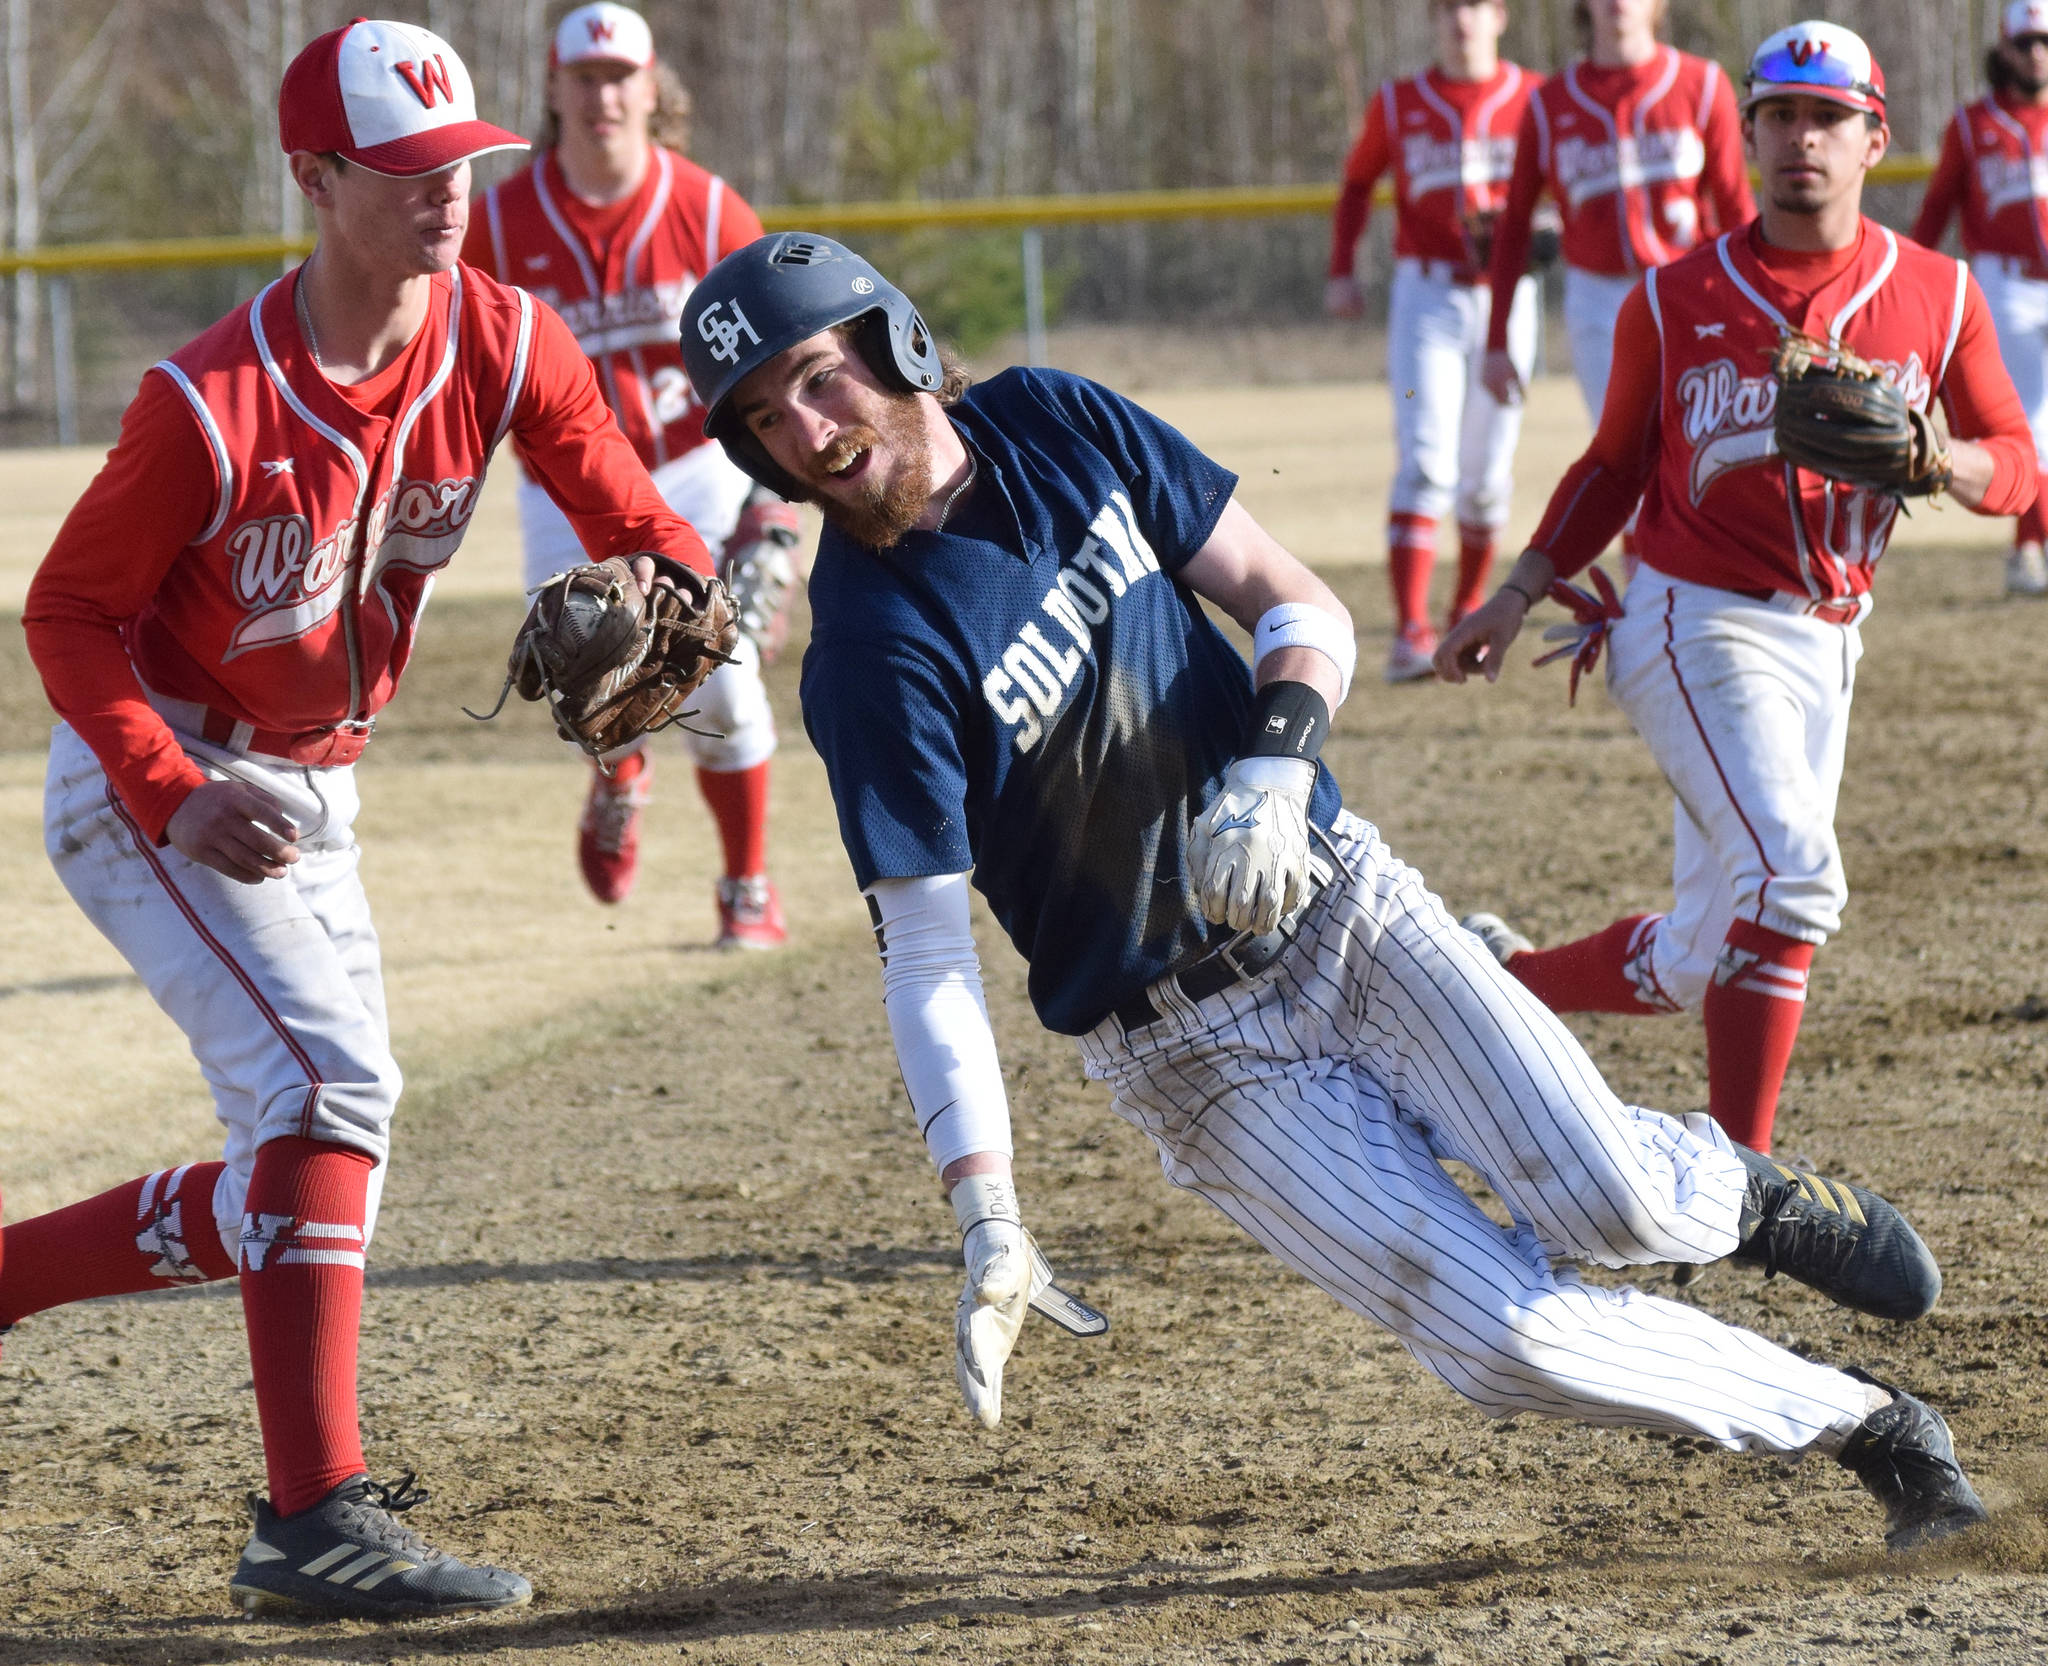 Soldotna’s David Michael (right) attempts to evade the tag of Wasilla’s Clayton Boyett in a Southcentral Conference contest Thursday, May 2, 2019, at the Soldotna Baseball Fields. (Photo by Joey Klecka/Peninsula Clarion)